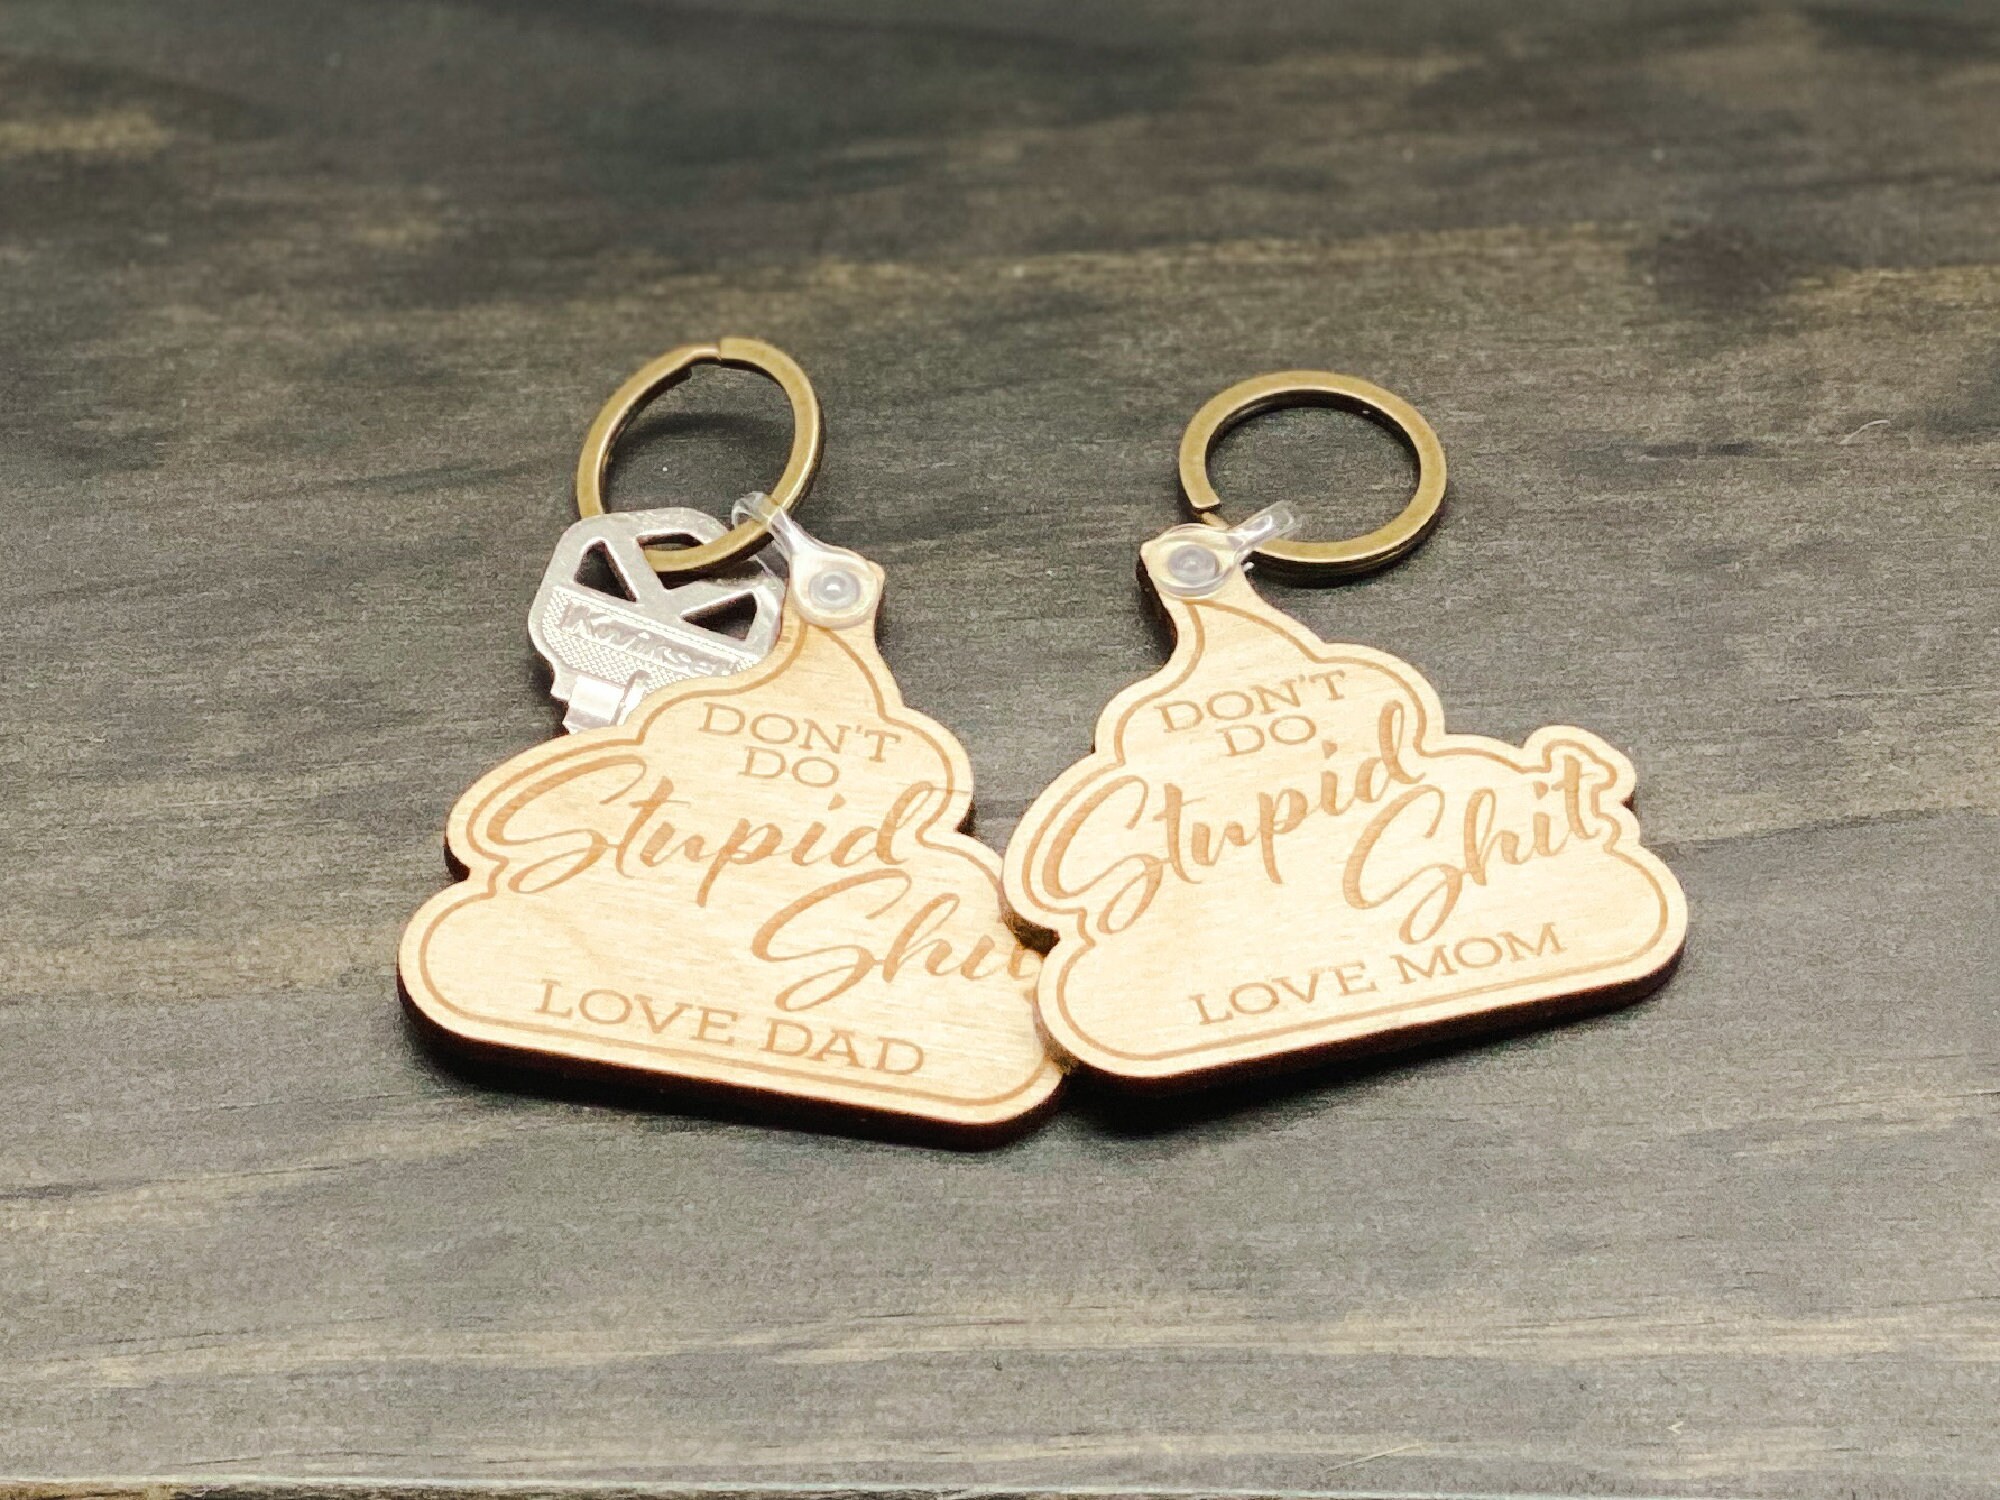 https://graceandelm.com/wp-content/uploads/2022/12/dont-do-stupid-shit-keychain-laser-engraved-key-fob-wood-keychain-poop-keychain-graduation-gift-funny-gift-63ac58aa.jpg